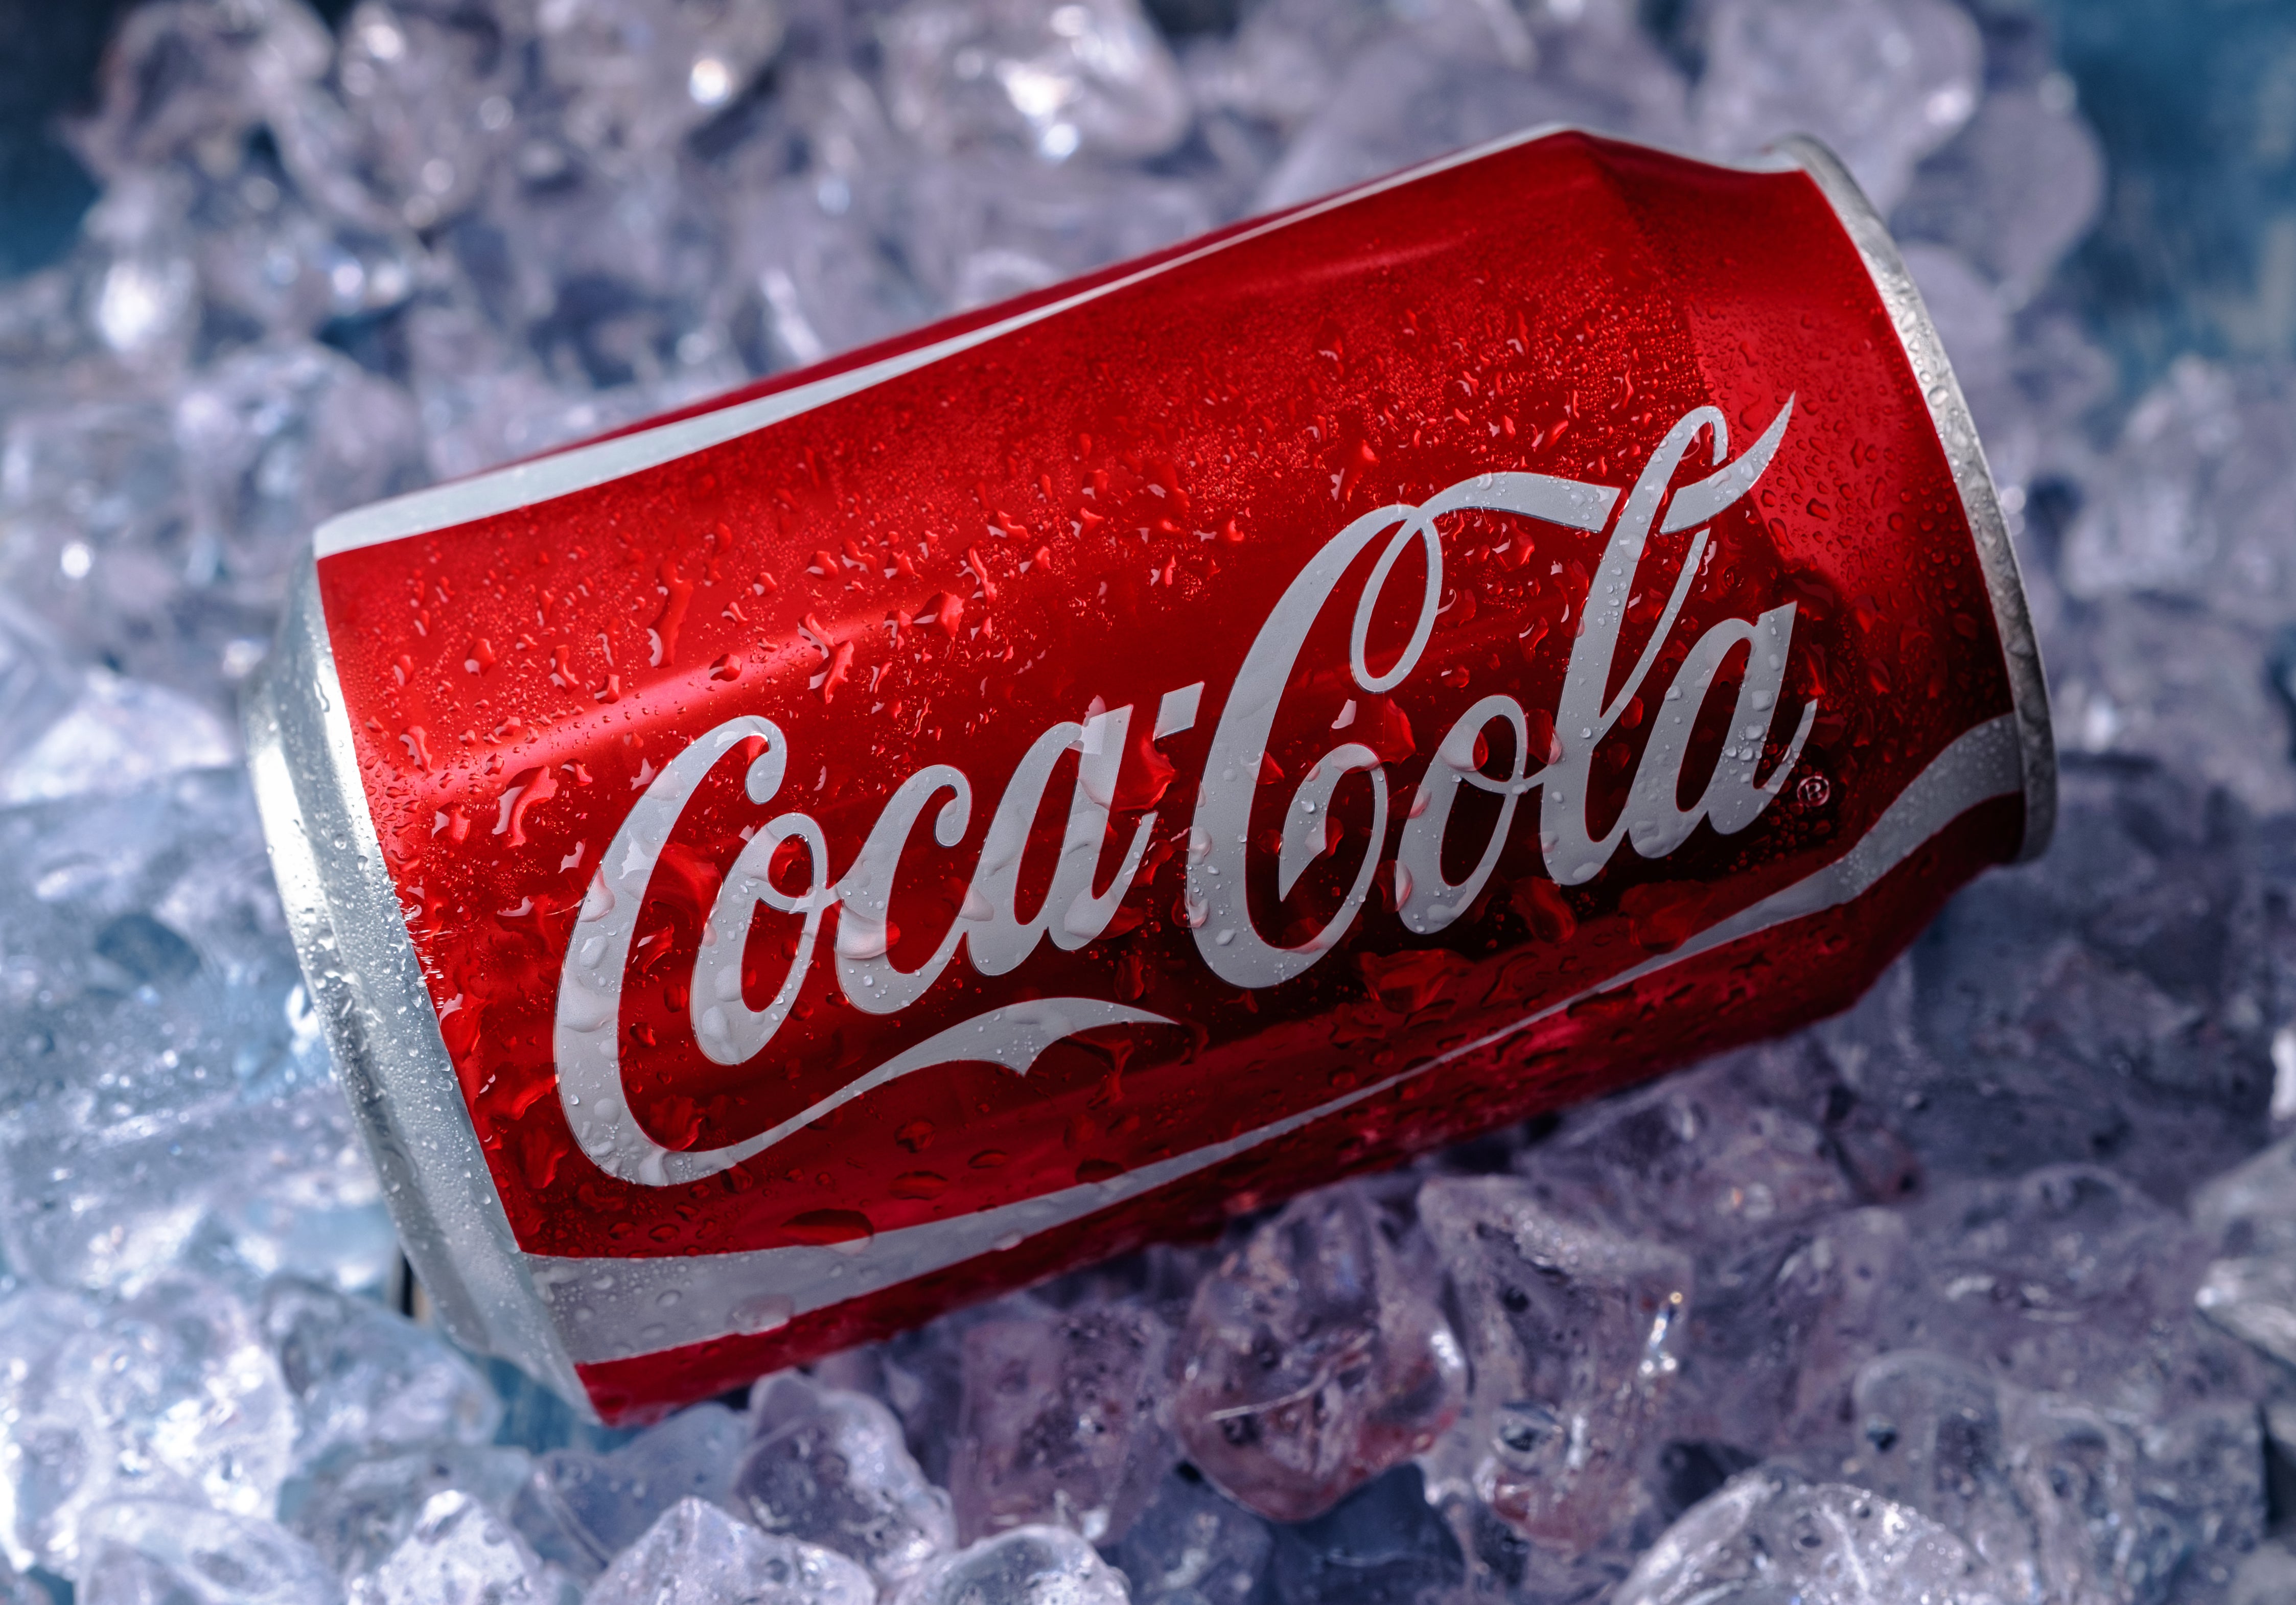 Coca-Cola’s eastern European bottling business has halted production in Ukraine (iStock/PA)